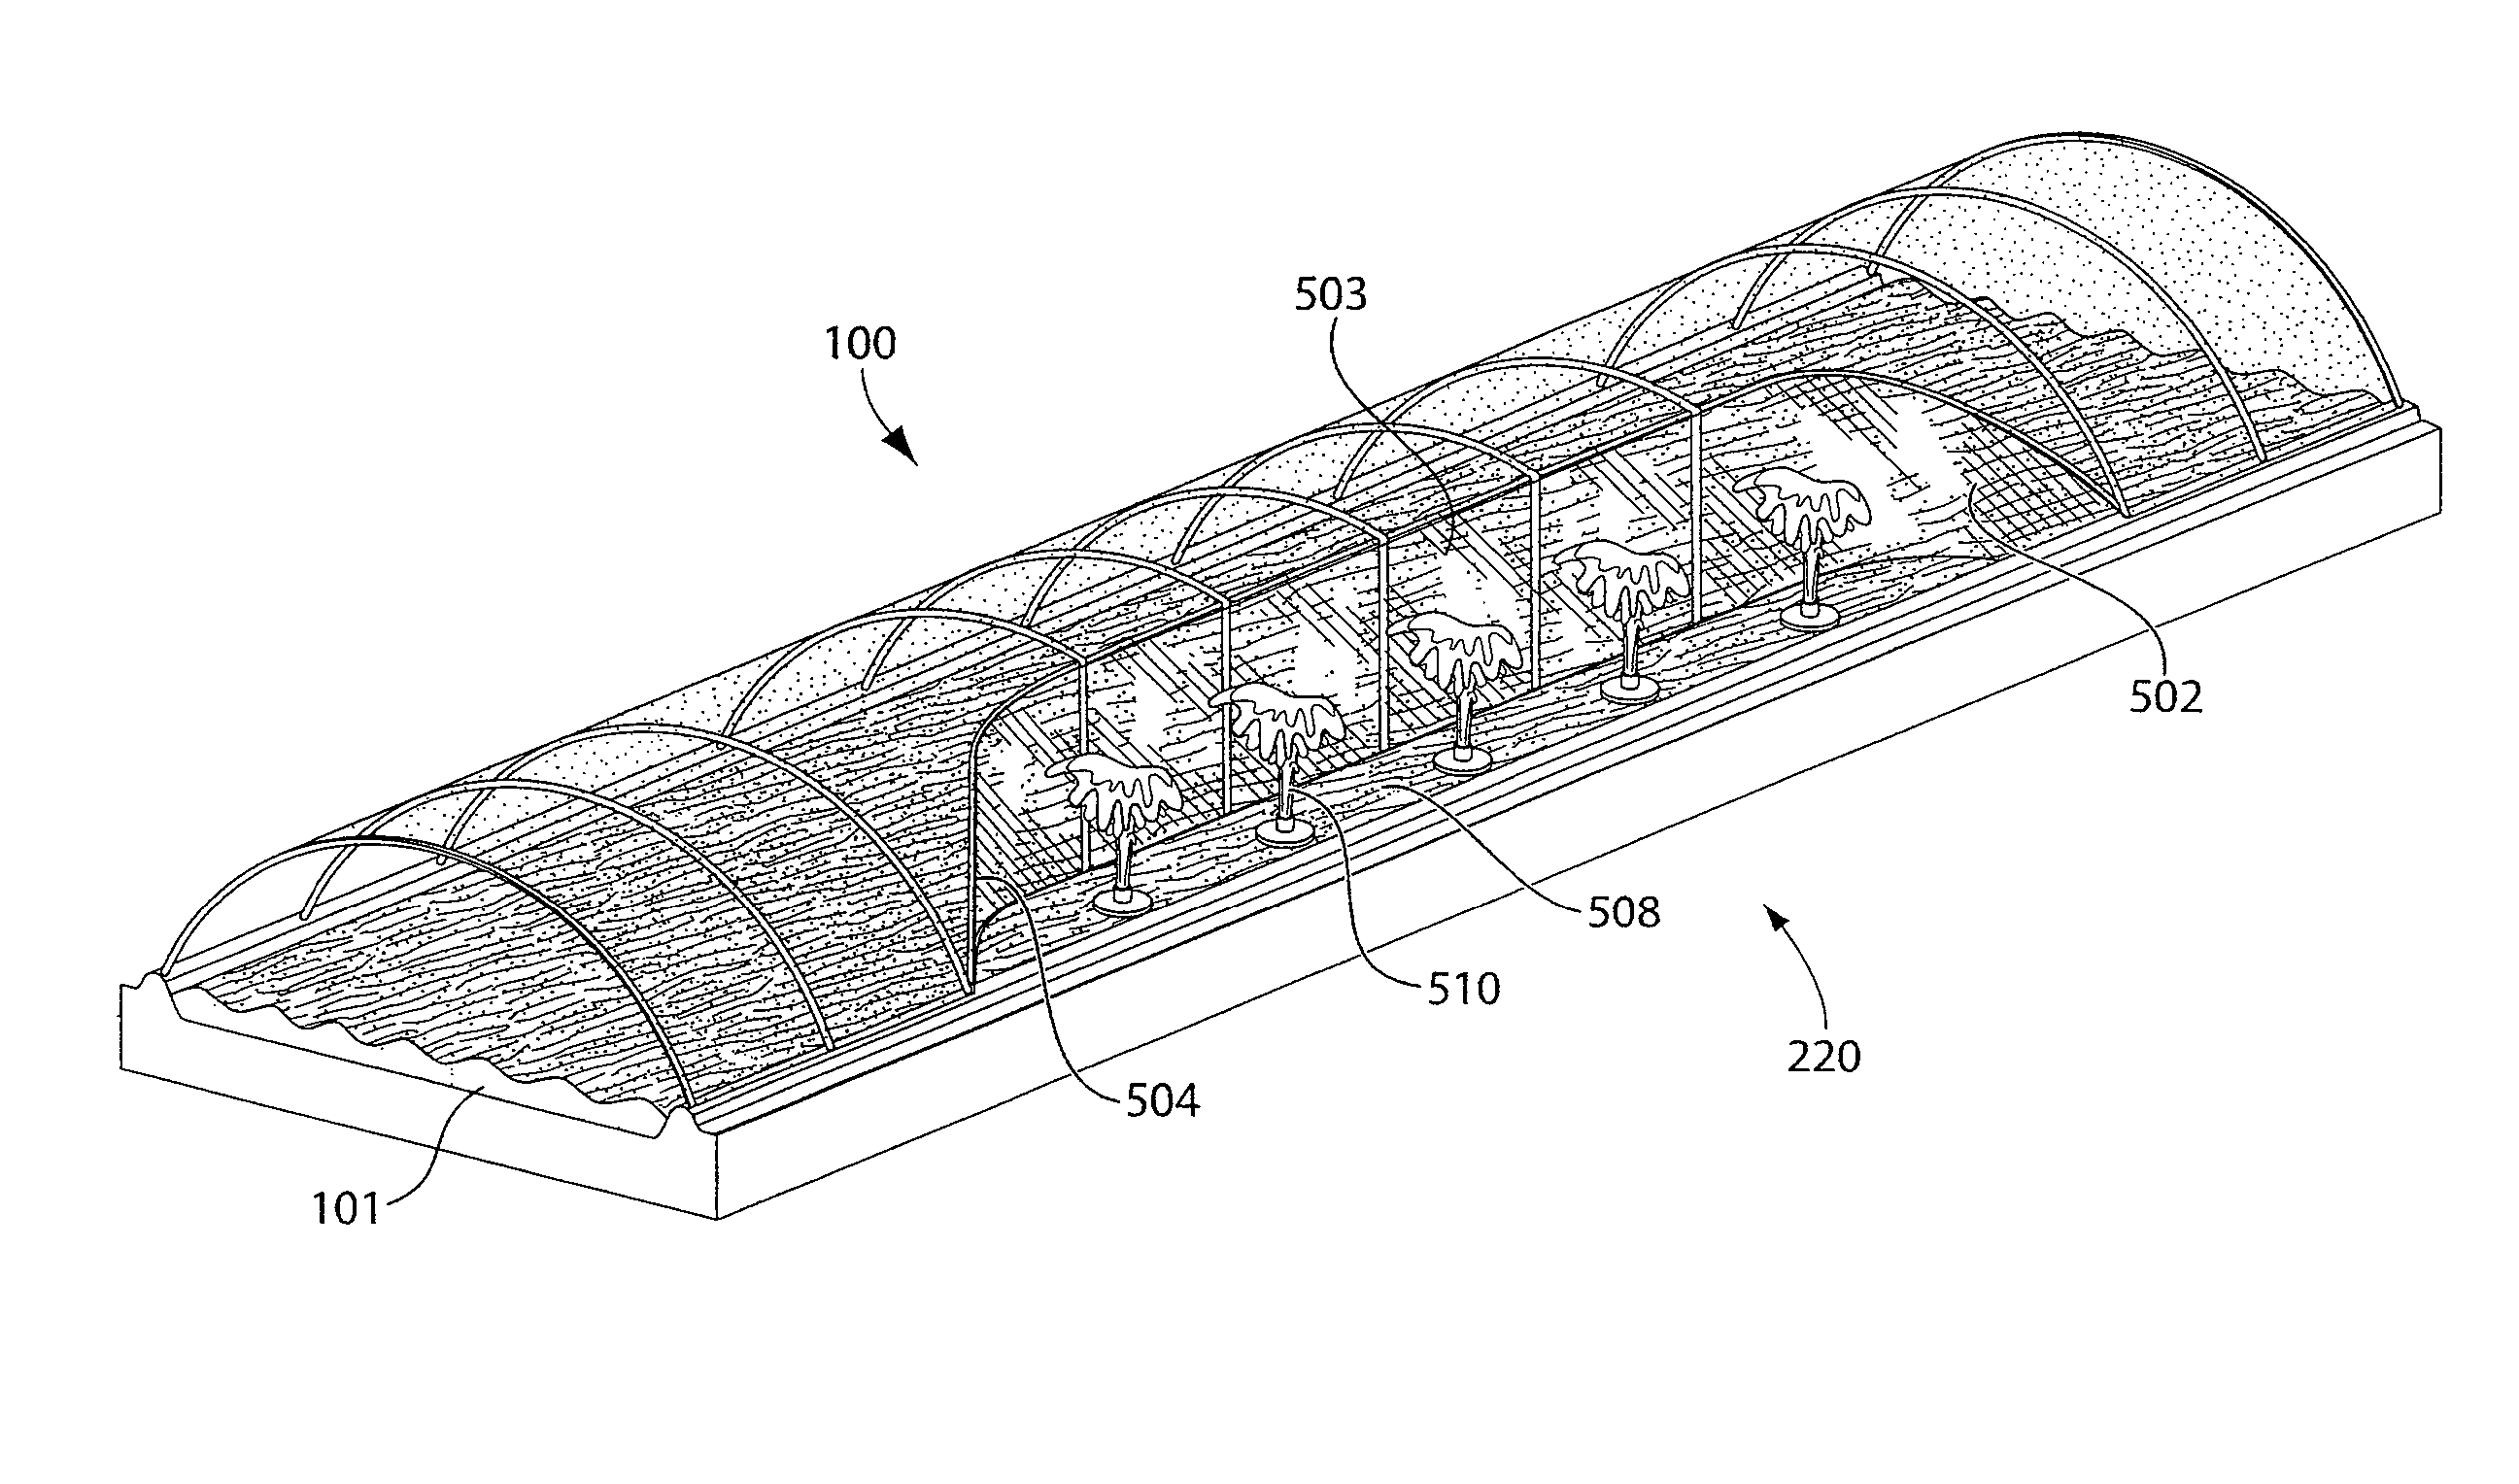 Photobioreactor systems and methods for treating CO2-enriched gas and producing biomass